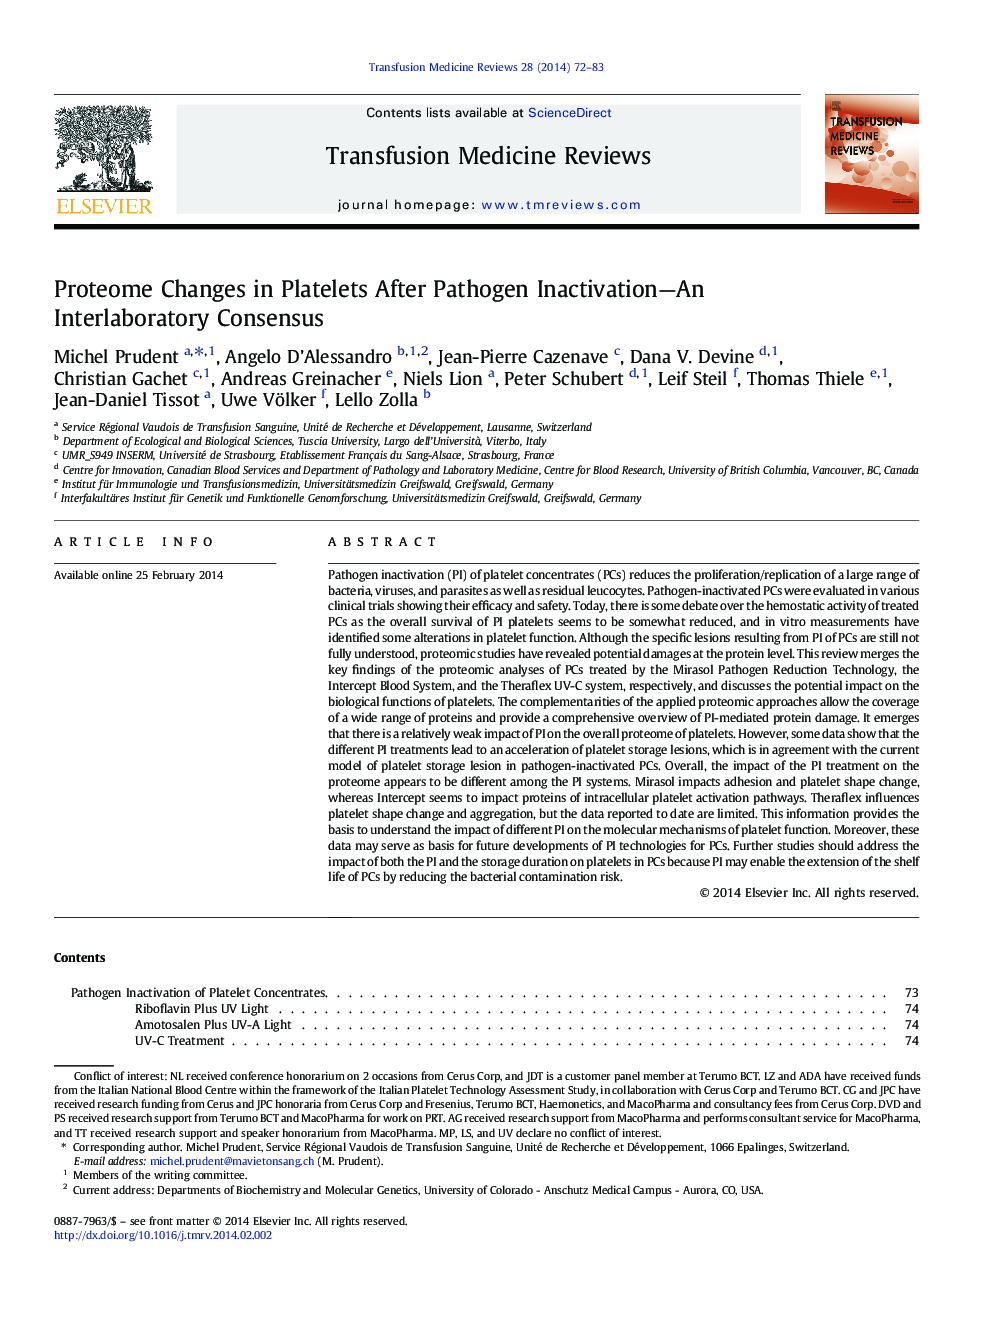 Proteome Changes in Platelets After Pathogen Inactivation—An Interlaboratory Consensus 